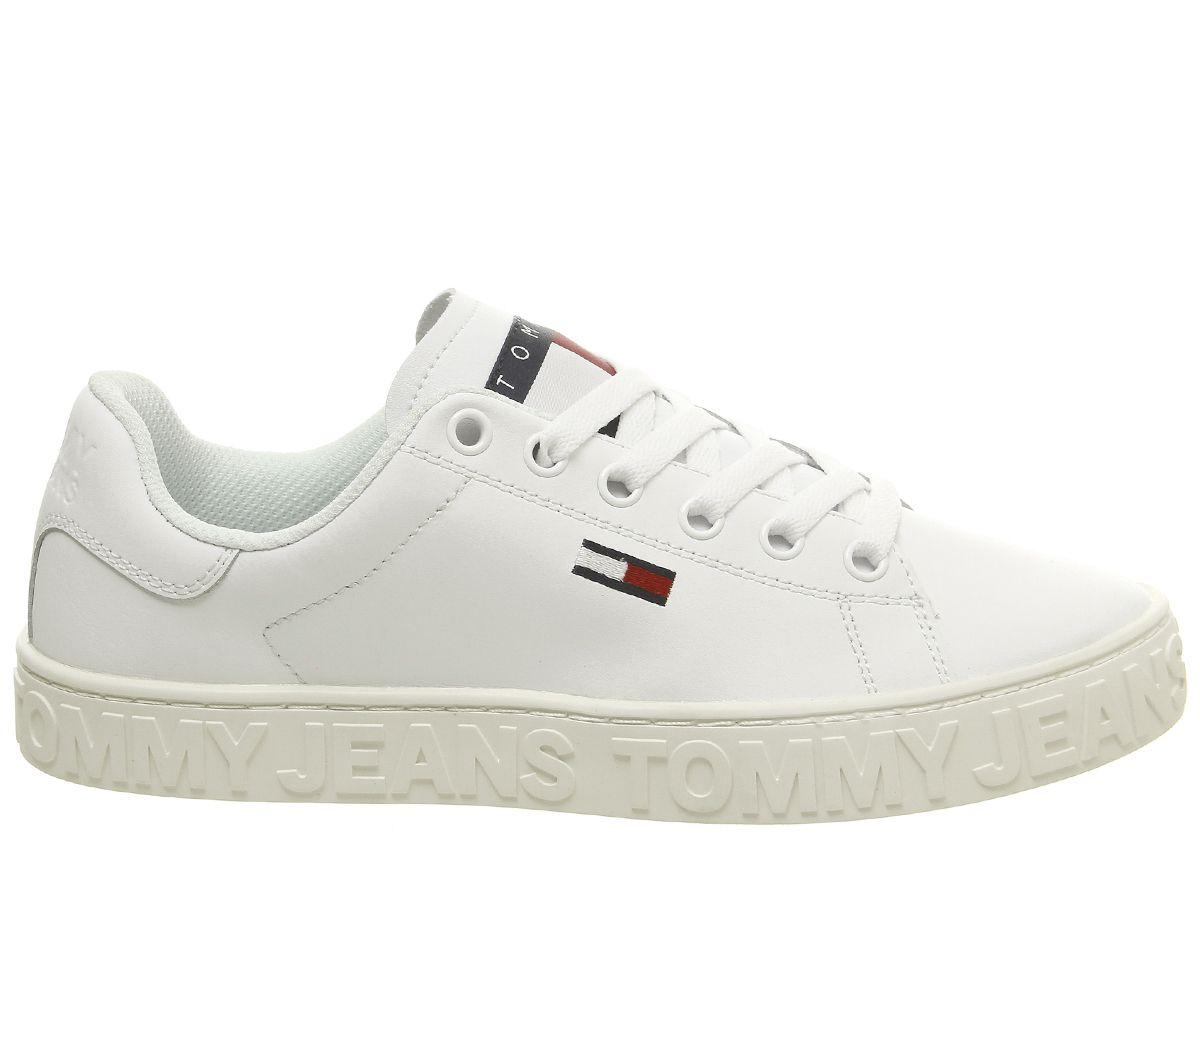 Tommy Hilfiger Jaz Trainers In White Sale Online, SAVE 60% - aveclumiere.com